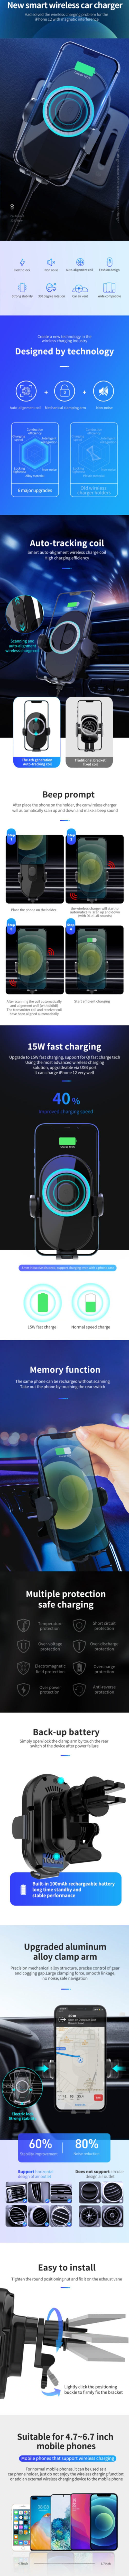 iPhone 12 Car Charger, 15W Wireless Car Charger, 15W Magnetic Car Charger, Car Air Vent Charger, Car Wireless Charger for iPhone 12 Pro Max, 15W Wireless Charger,